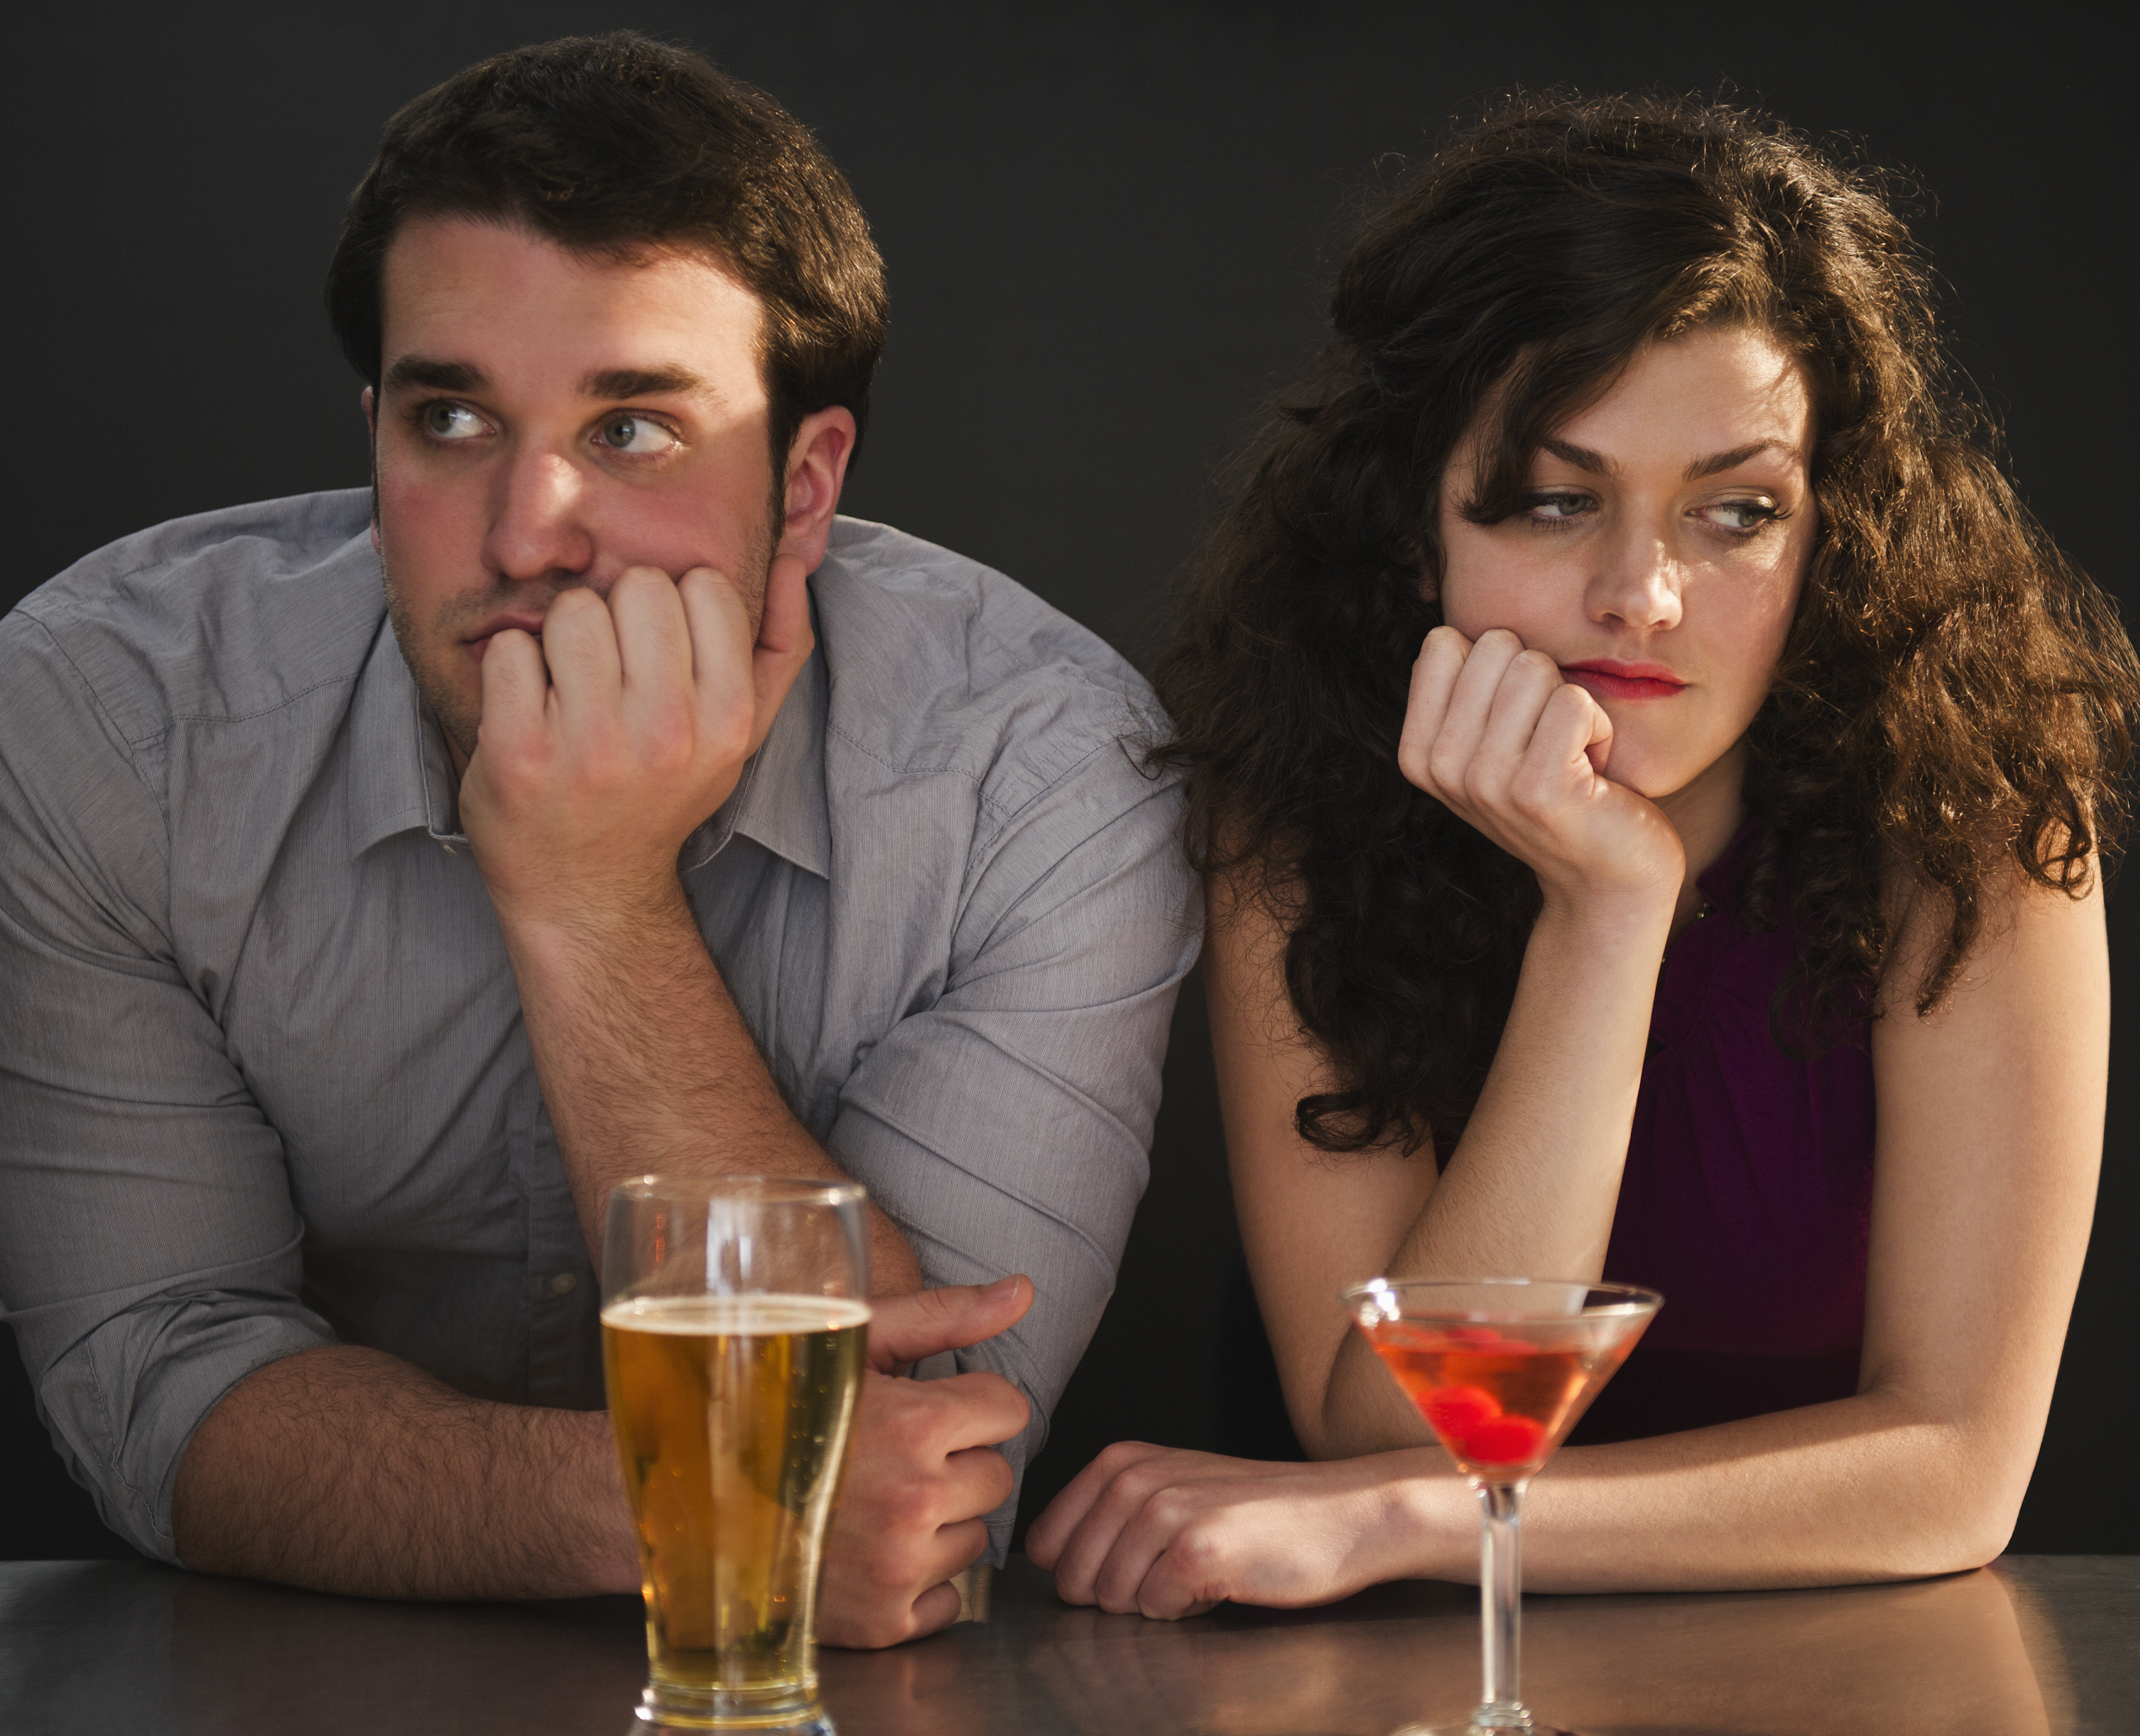 Bored couple sitting at a bar | Source: Getty Images